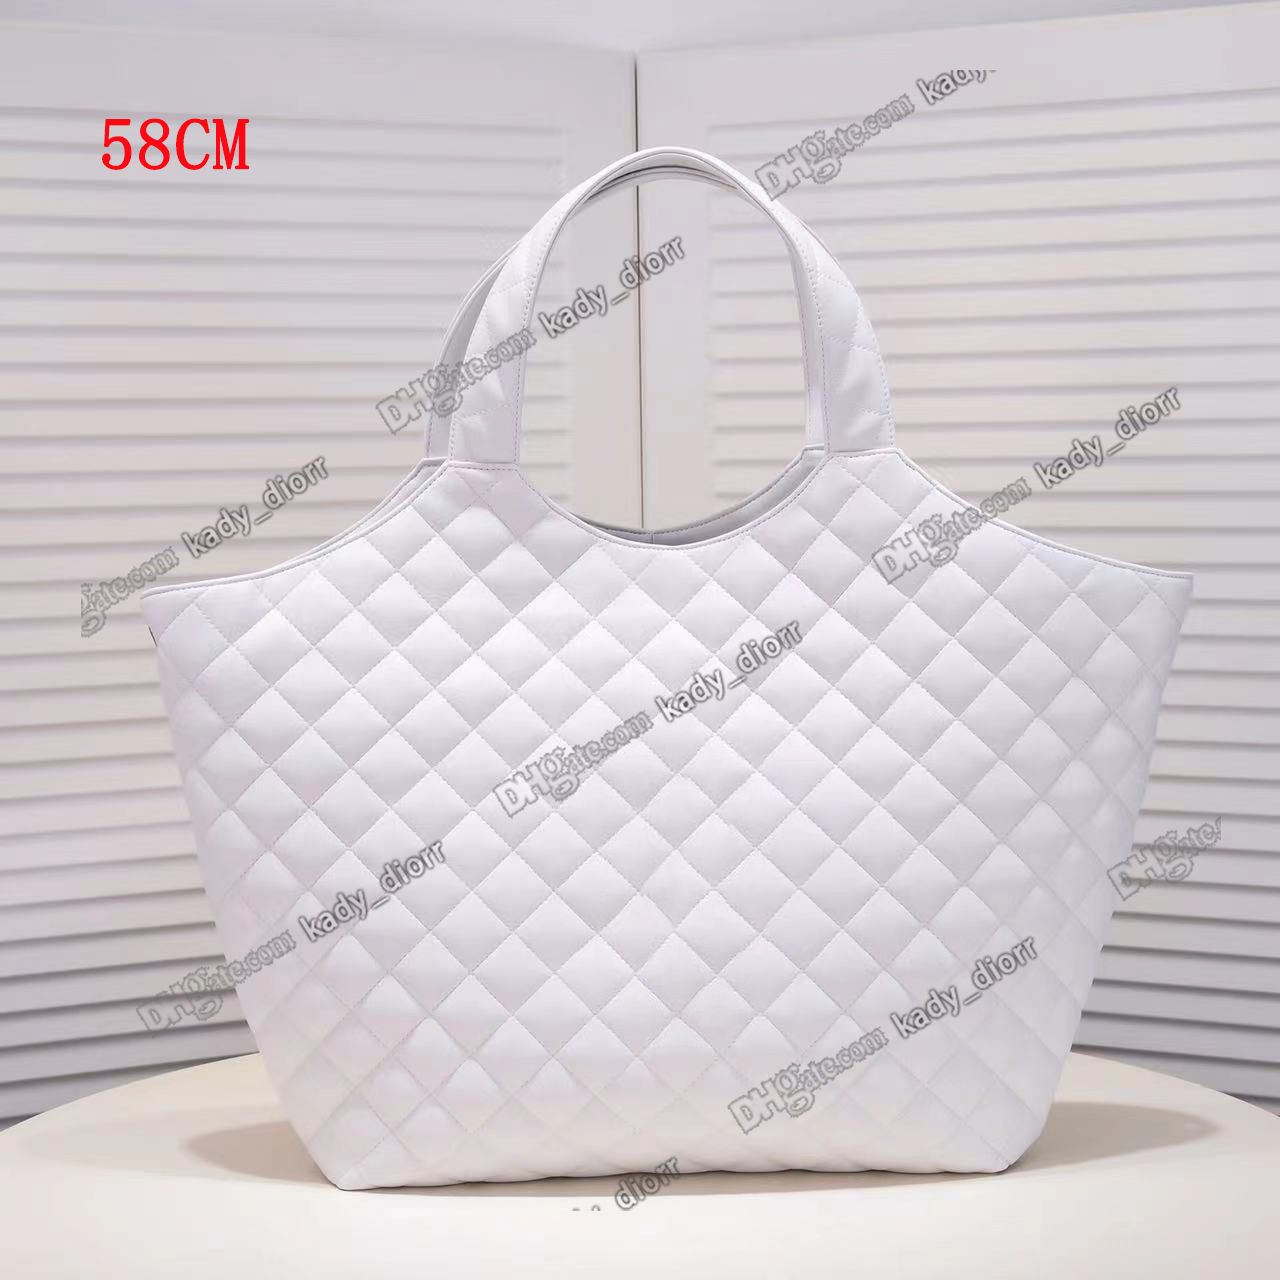 ysl i care maxi tote bag from dhgate｜TikTok Search